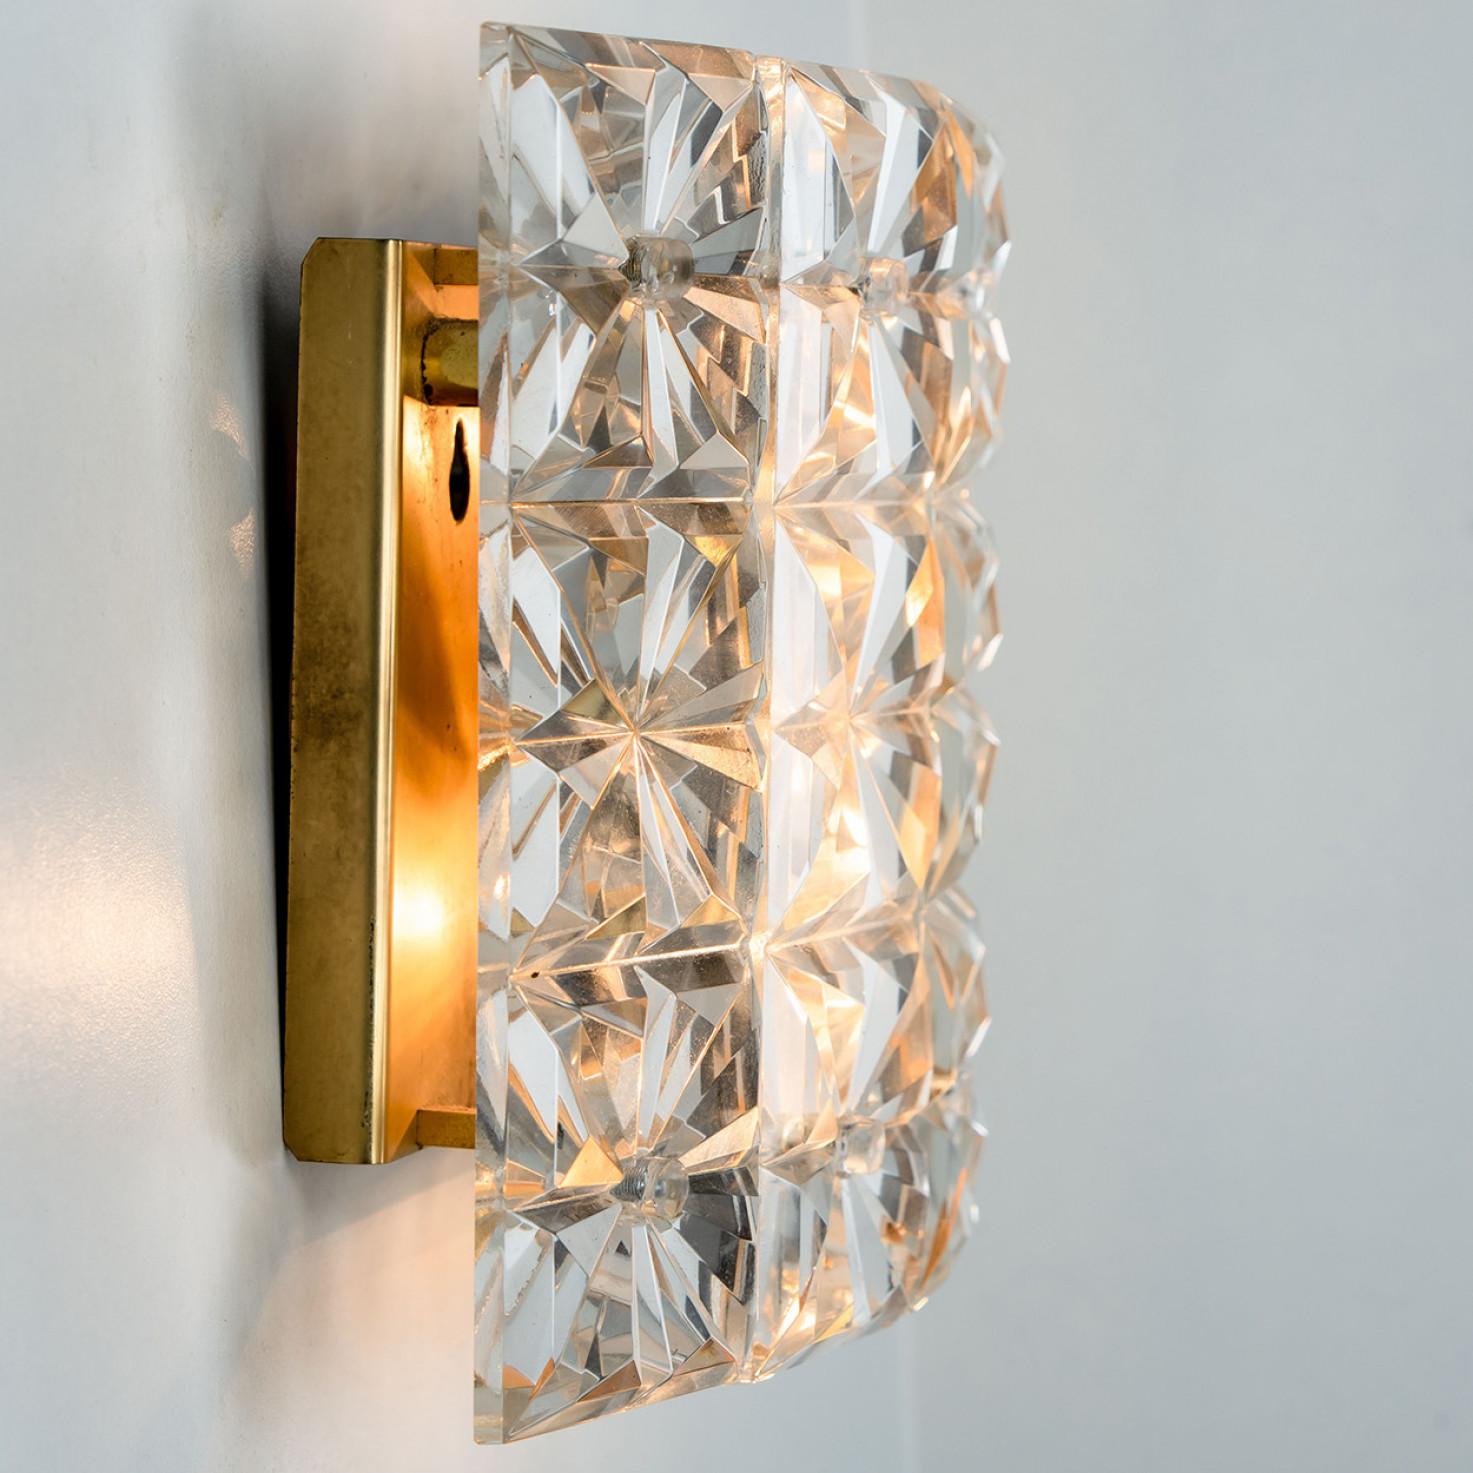 1 of the 3 Brass and Crystal Glass Wall Lights by Kinkeldey, 1970s For Sale 8